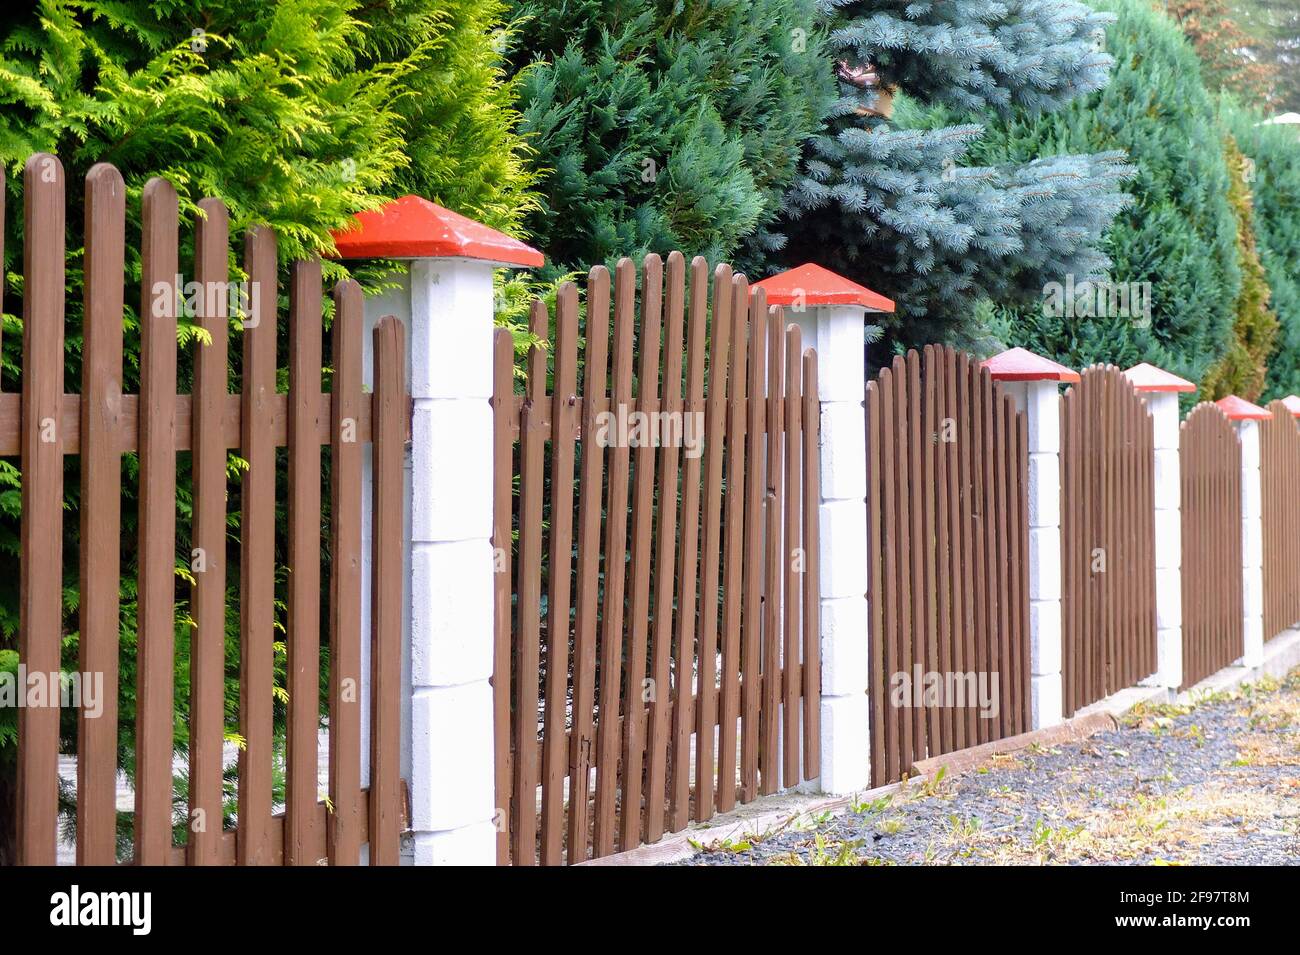 Wooden fence in toadstool look Stock Photo